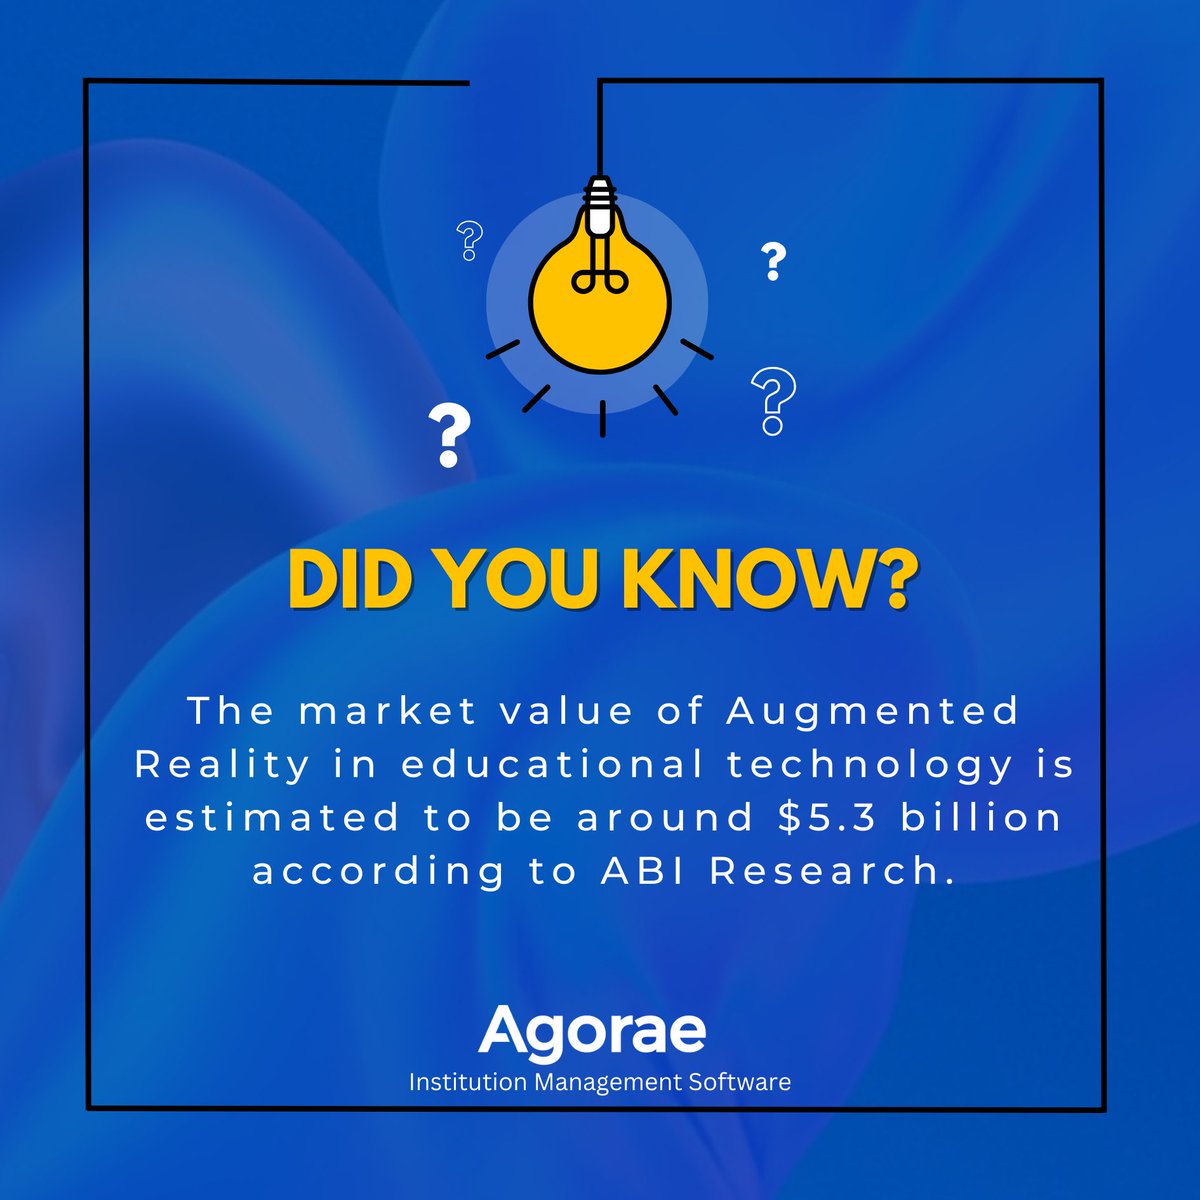 Follow us for more fascinating insights that keep you in the know!

#agoraeapp #edtech #schoolmanagement #innovationineducation #erpsoftware